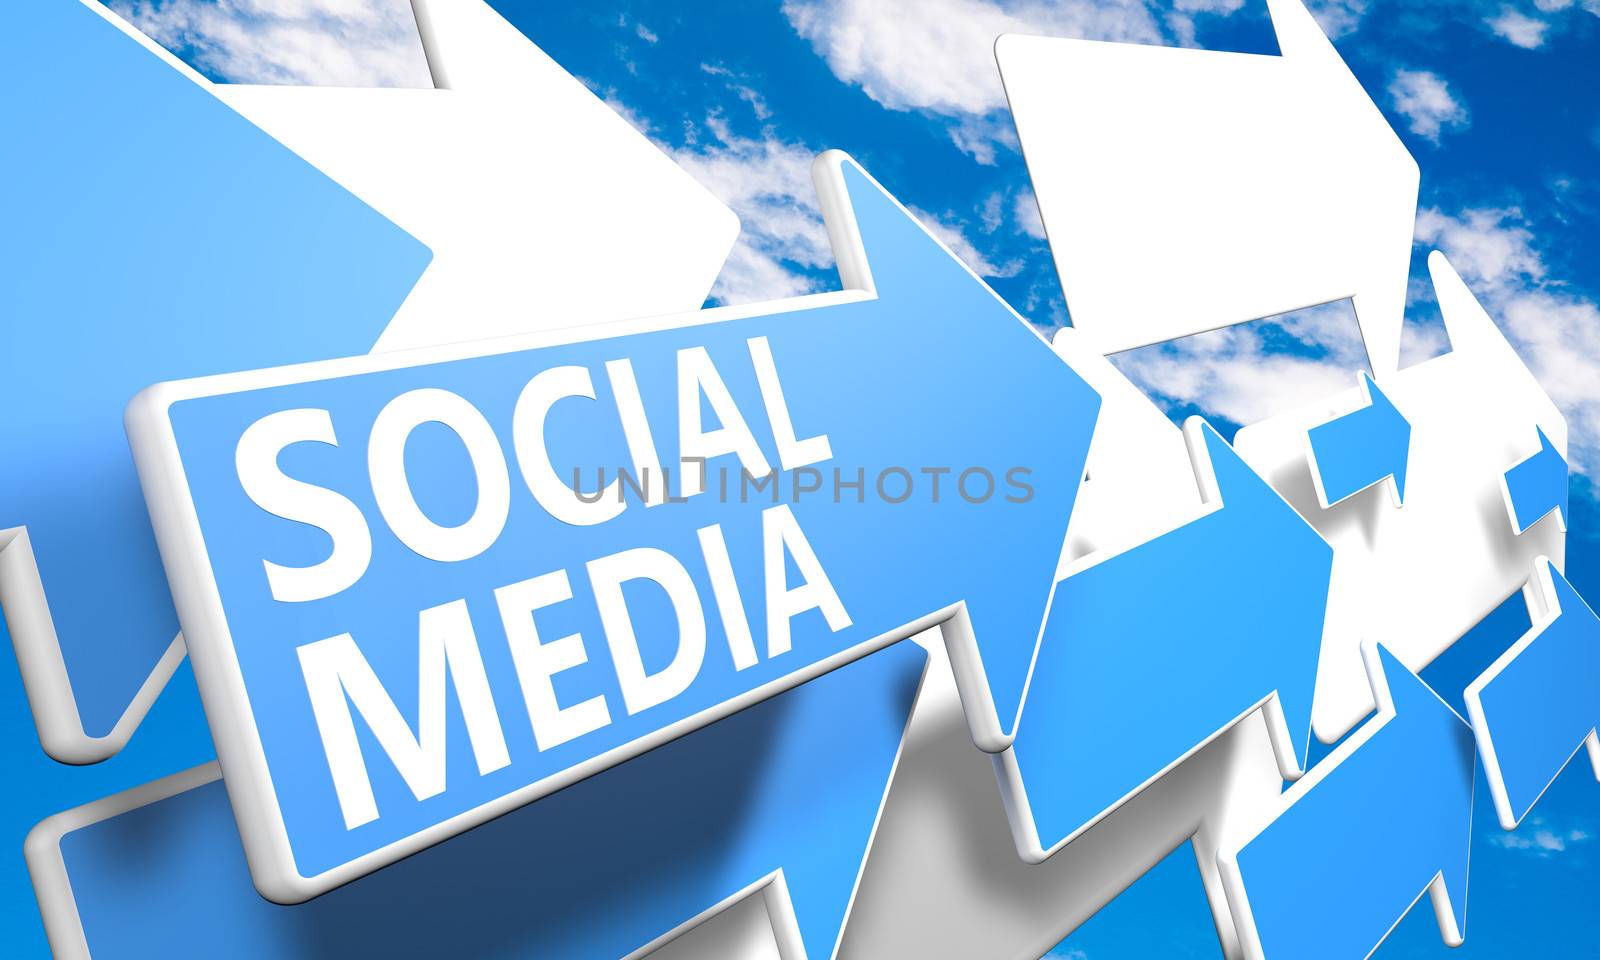 Social Media 3d render concept with blue and white arrows flying upwards in a blue sky with clouds